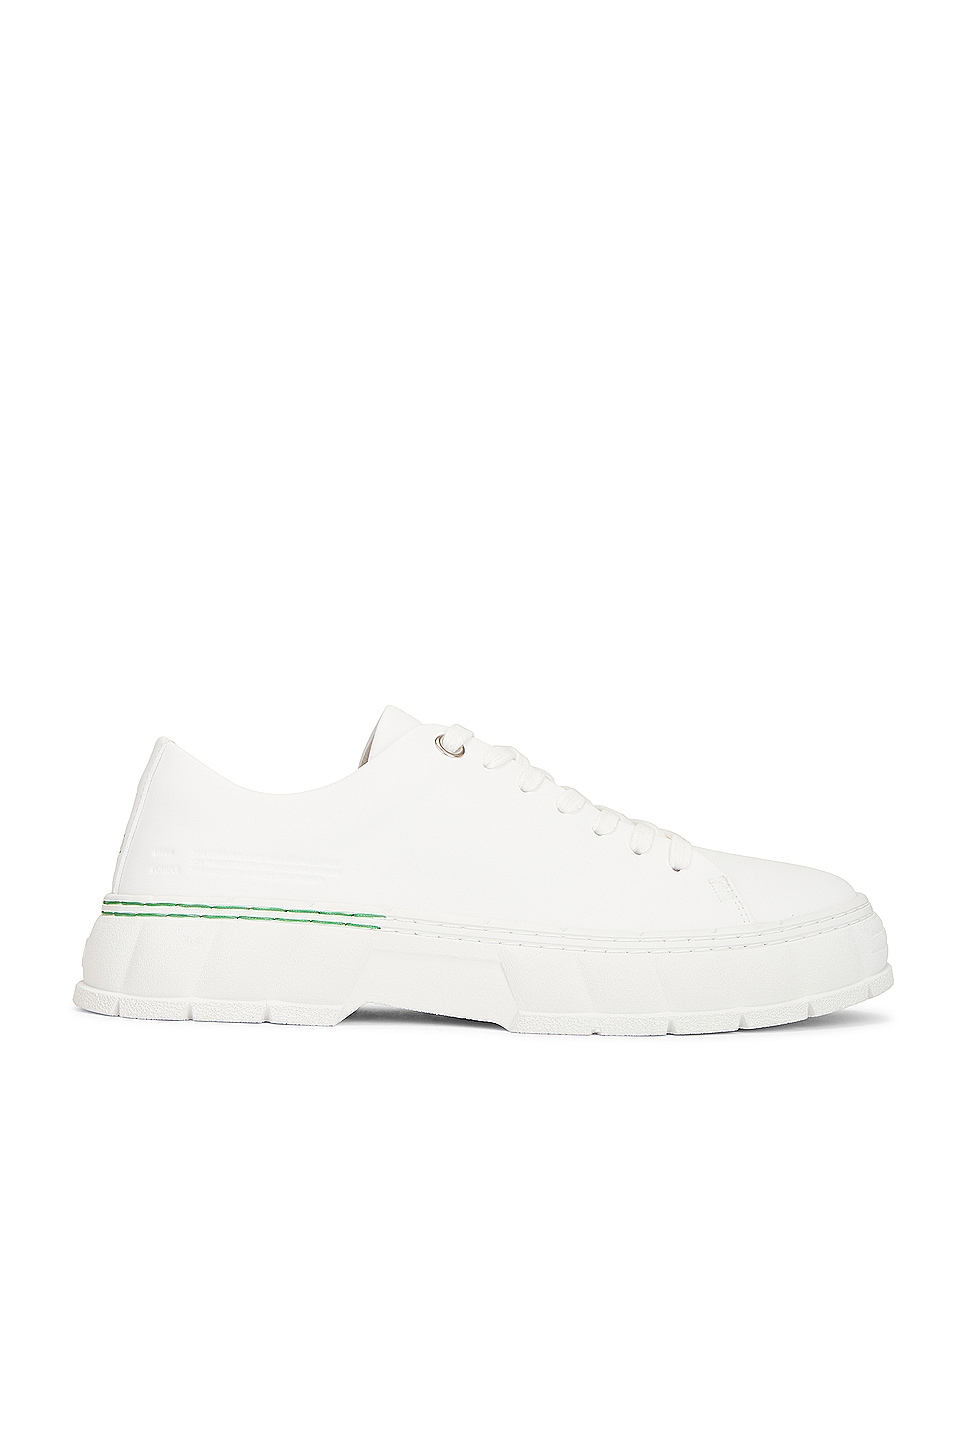 Image 1 of Viron 2005 Low Top Sneaker in White Corn